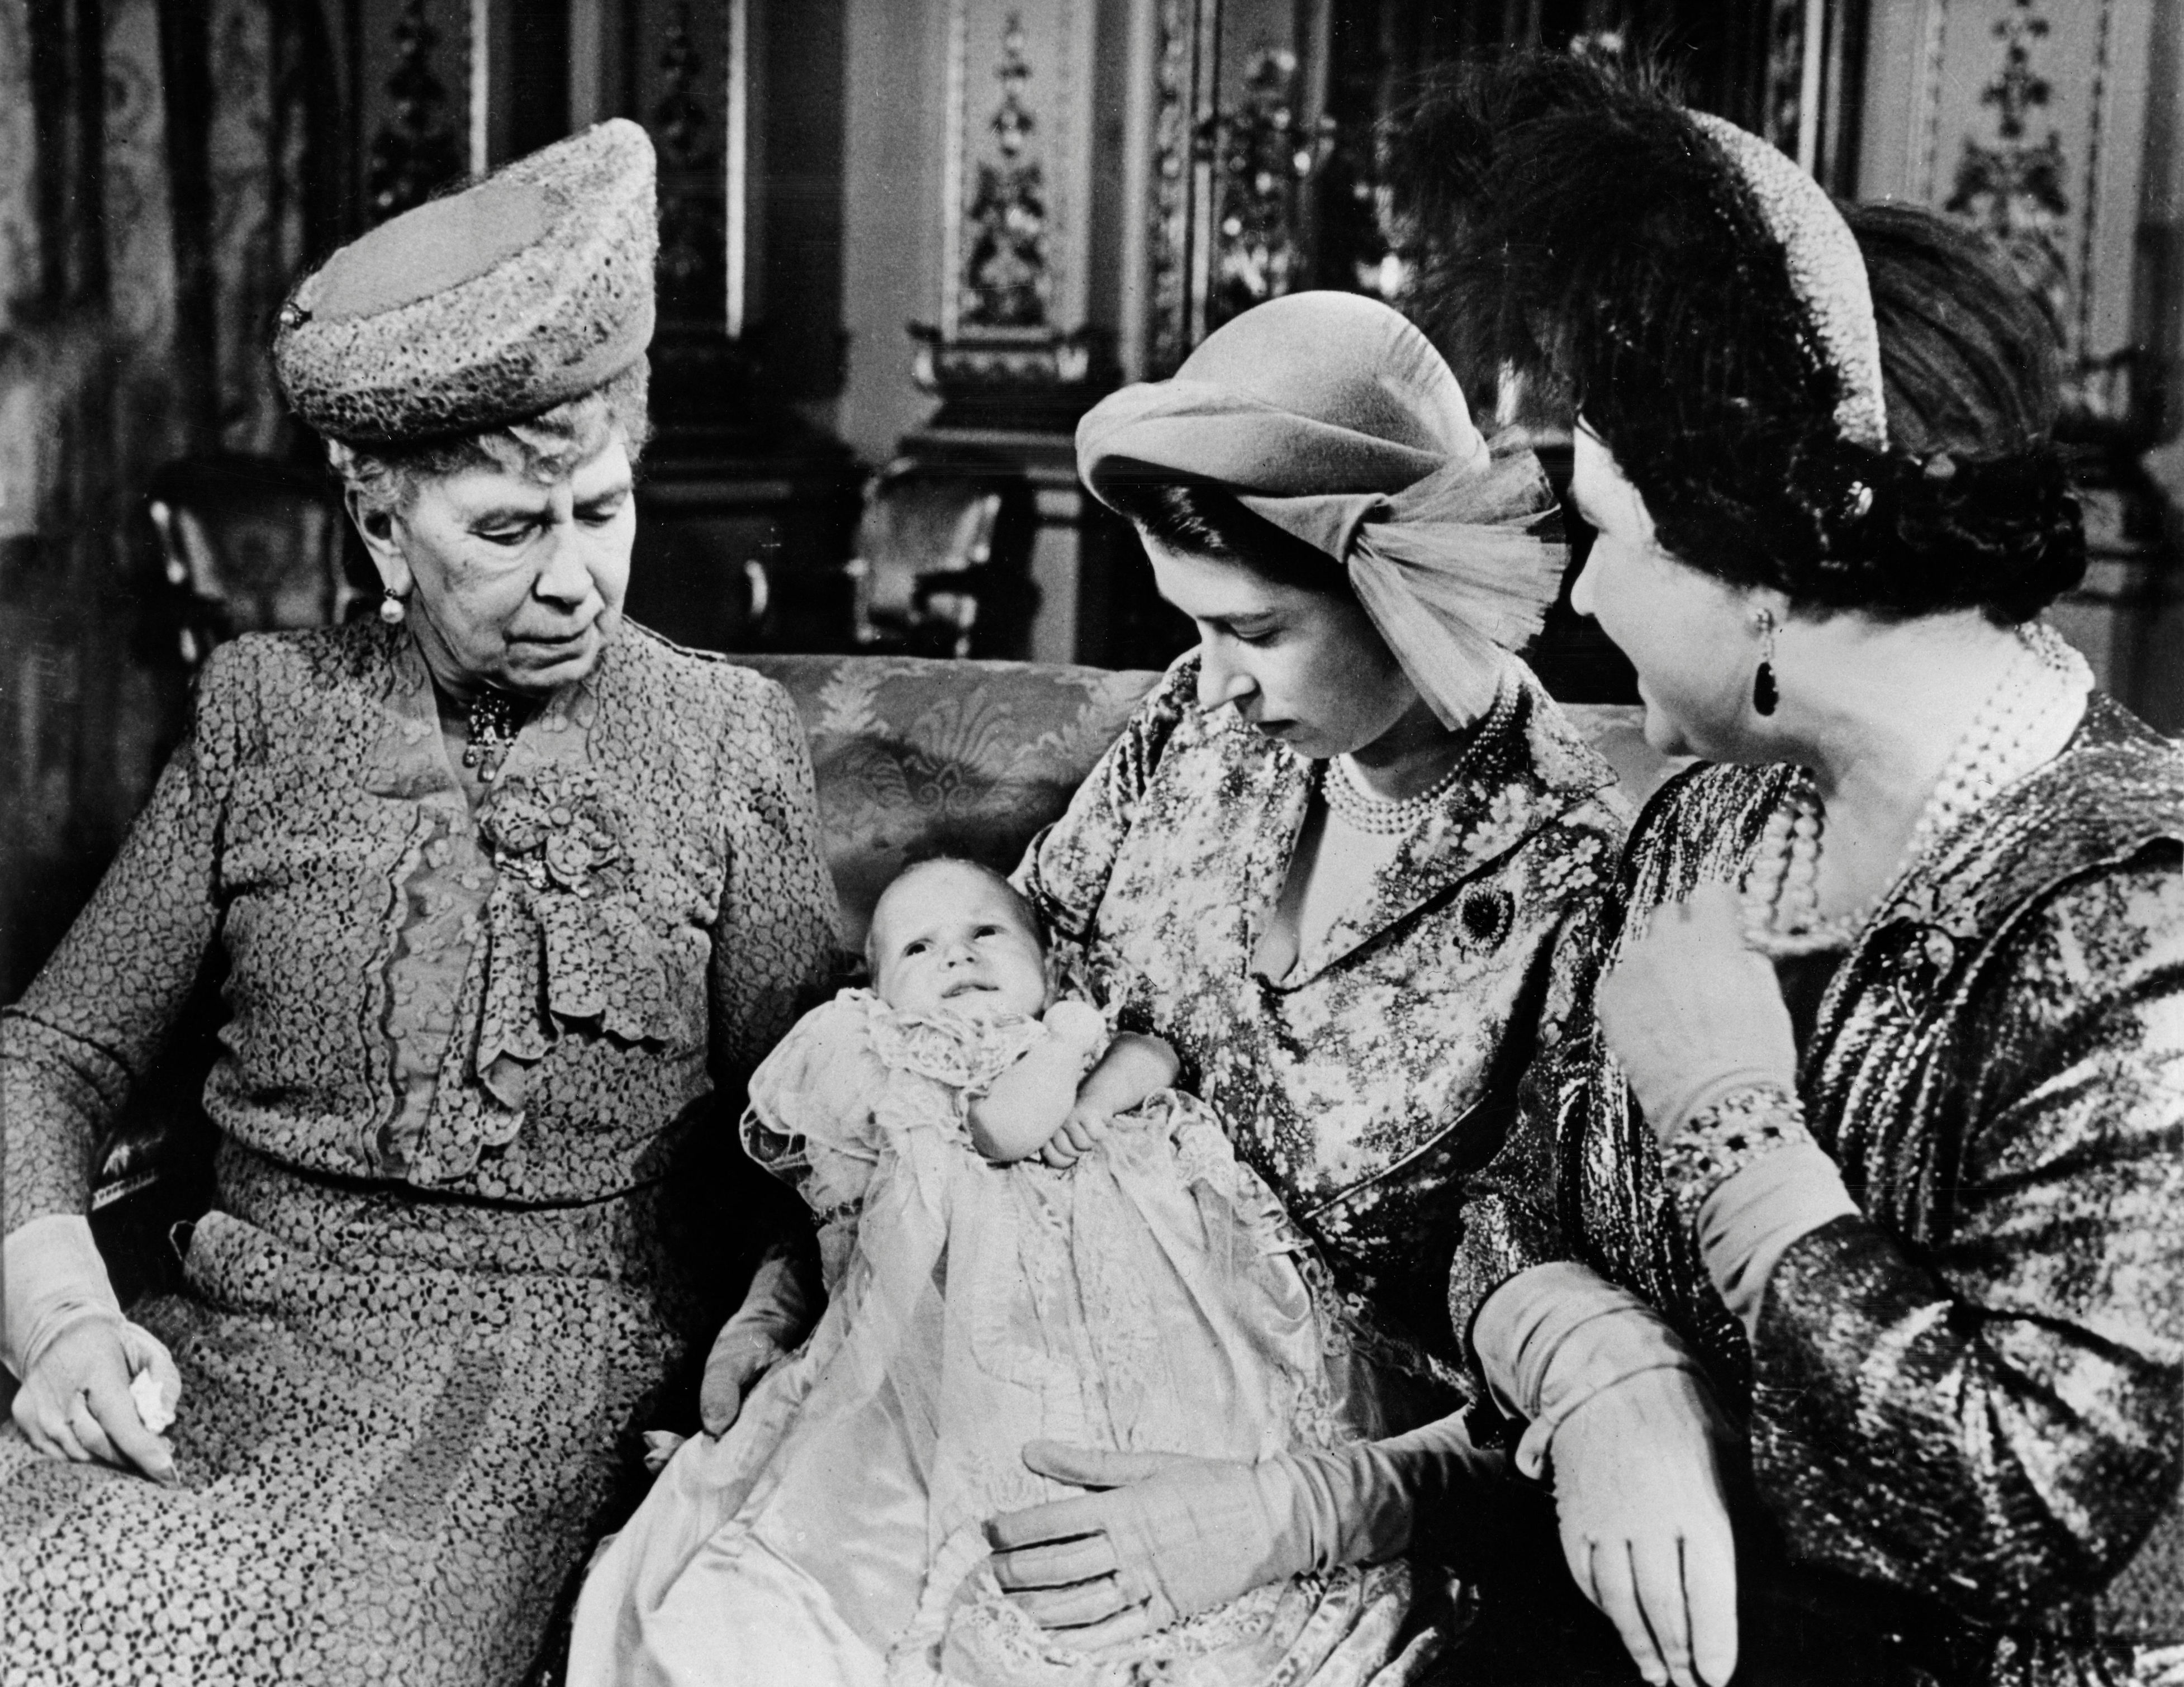 <p>Princess Elizabeth (later Queen Elizabeth II) cradled her second child, daughter Princess Anne, as grandmother Queen Mary and mother Queen Elizabeth the Queen Mother looked on at Anne's christening in October 1950.</p>